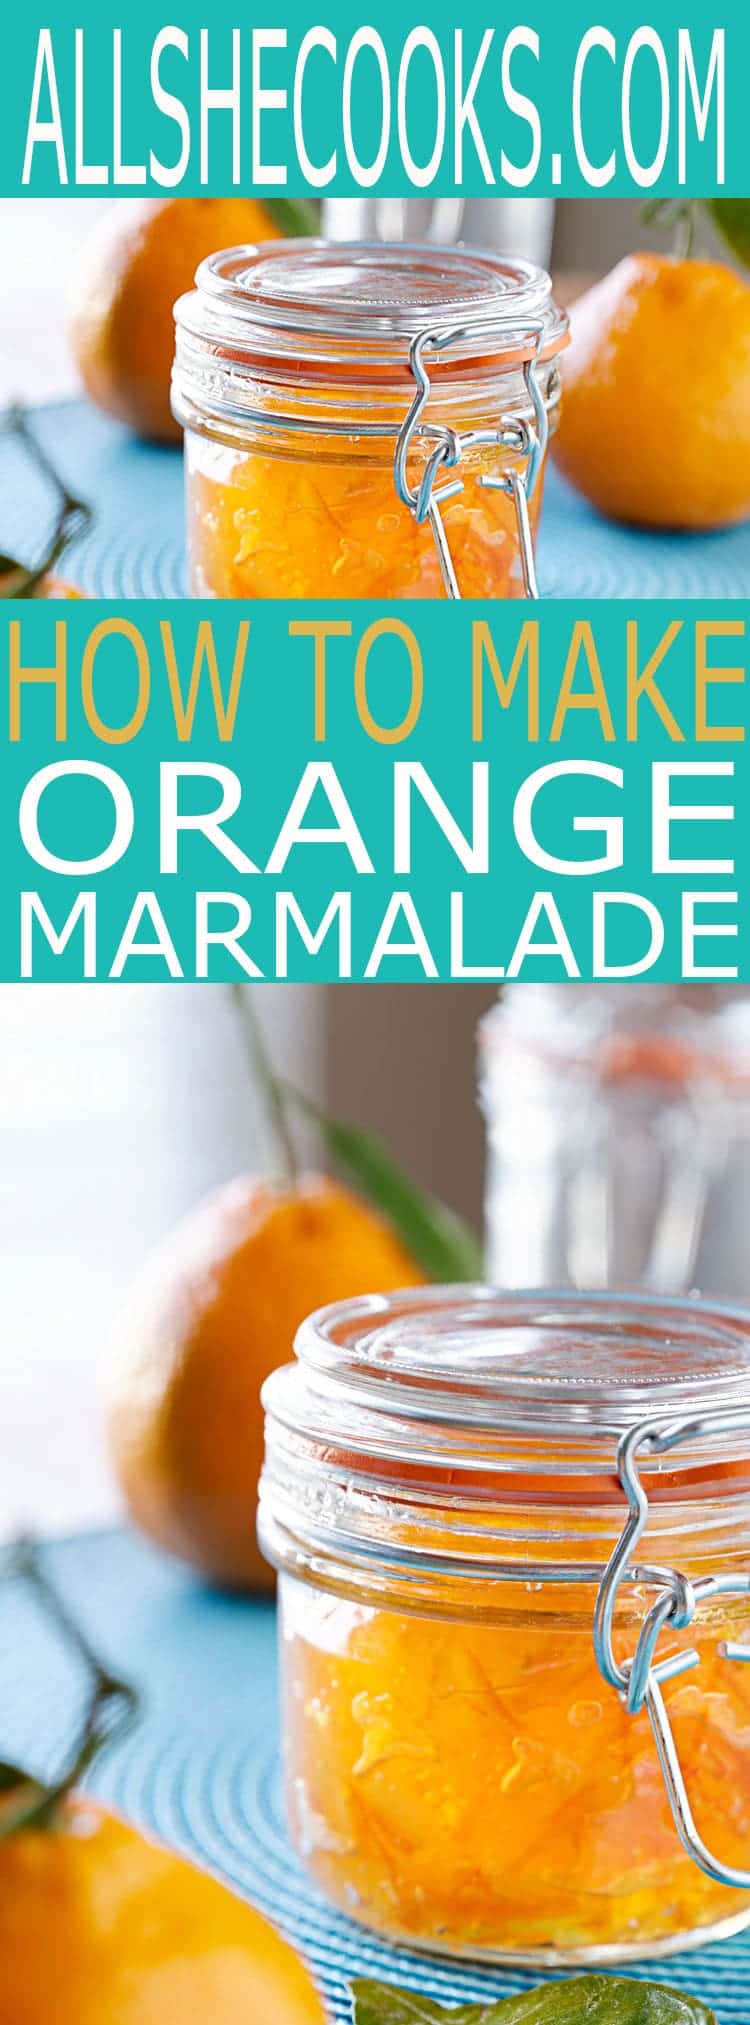 Enjoy this delicious citrus marmalade that is made from grapefruit, lemon and oranges without the addition of pectin. Absolutely delicious and not like any citrus spread you'll find in the store.